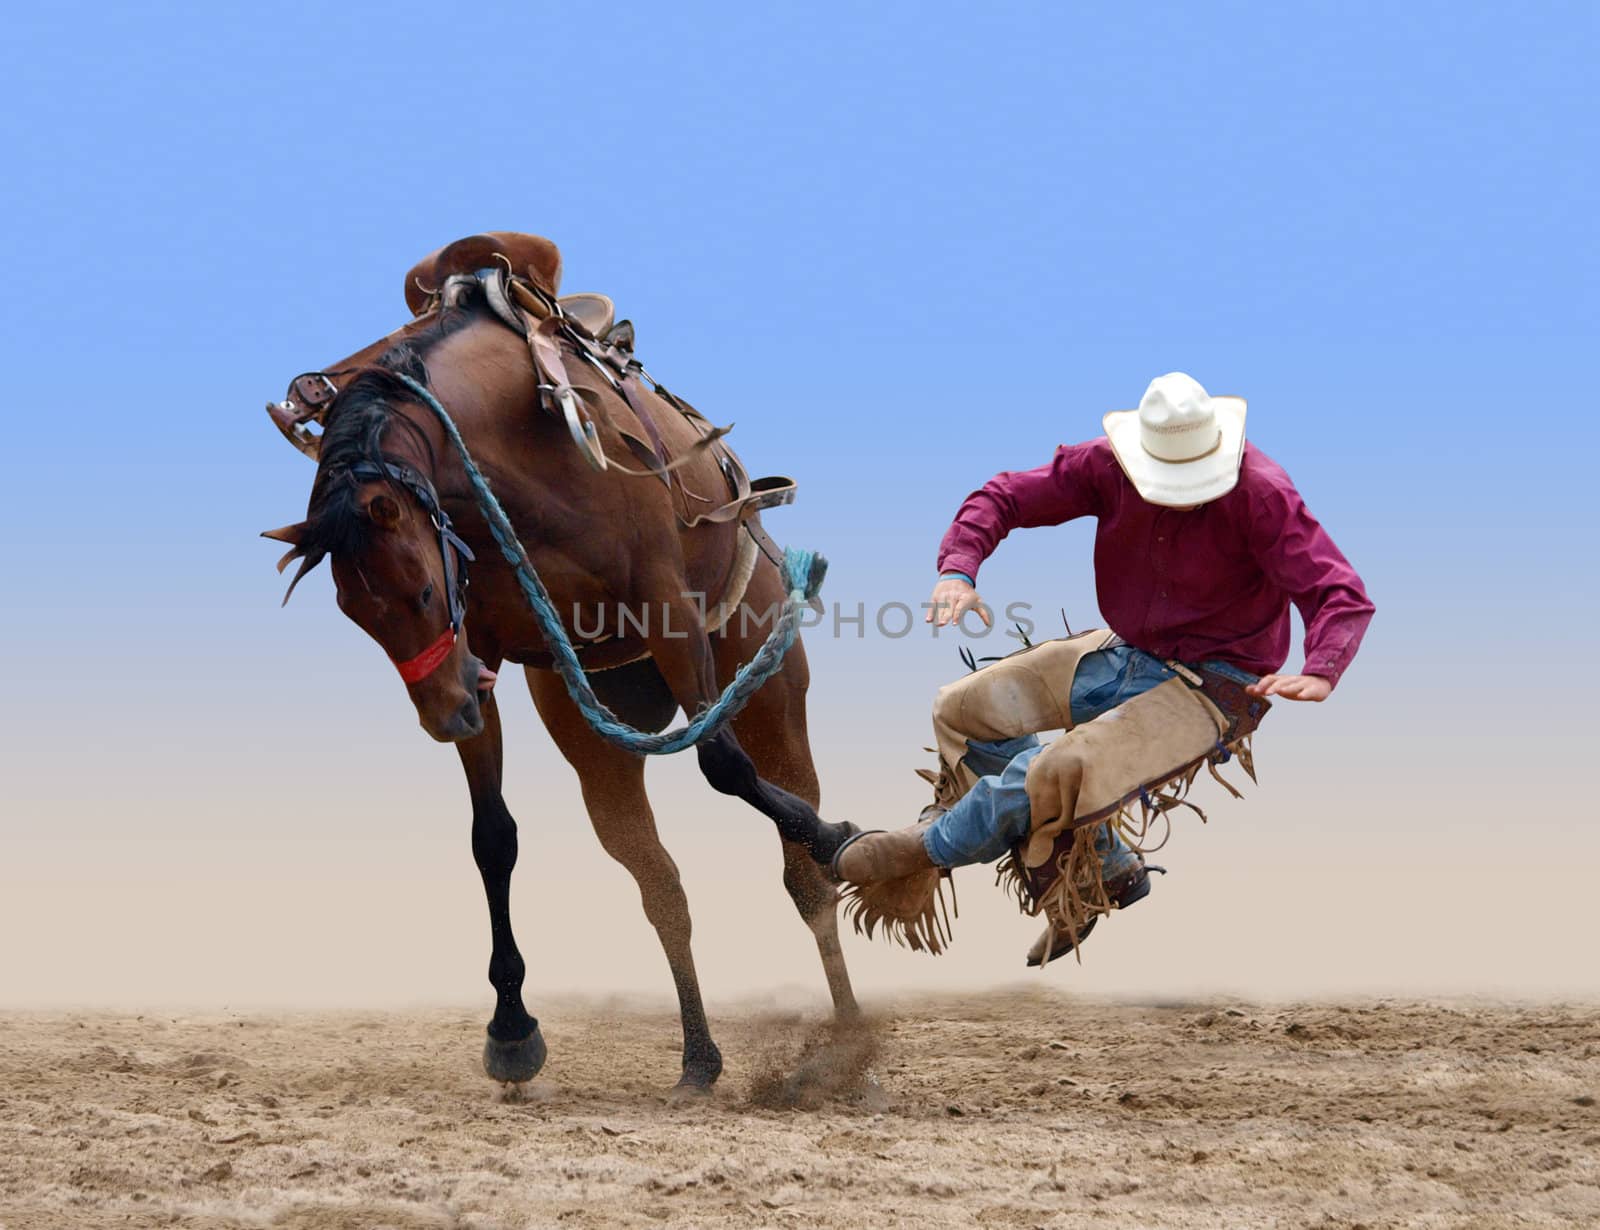 Cowboy bucked of a bucking Bronco isolated with path